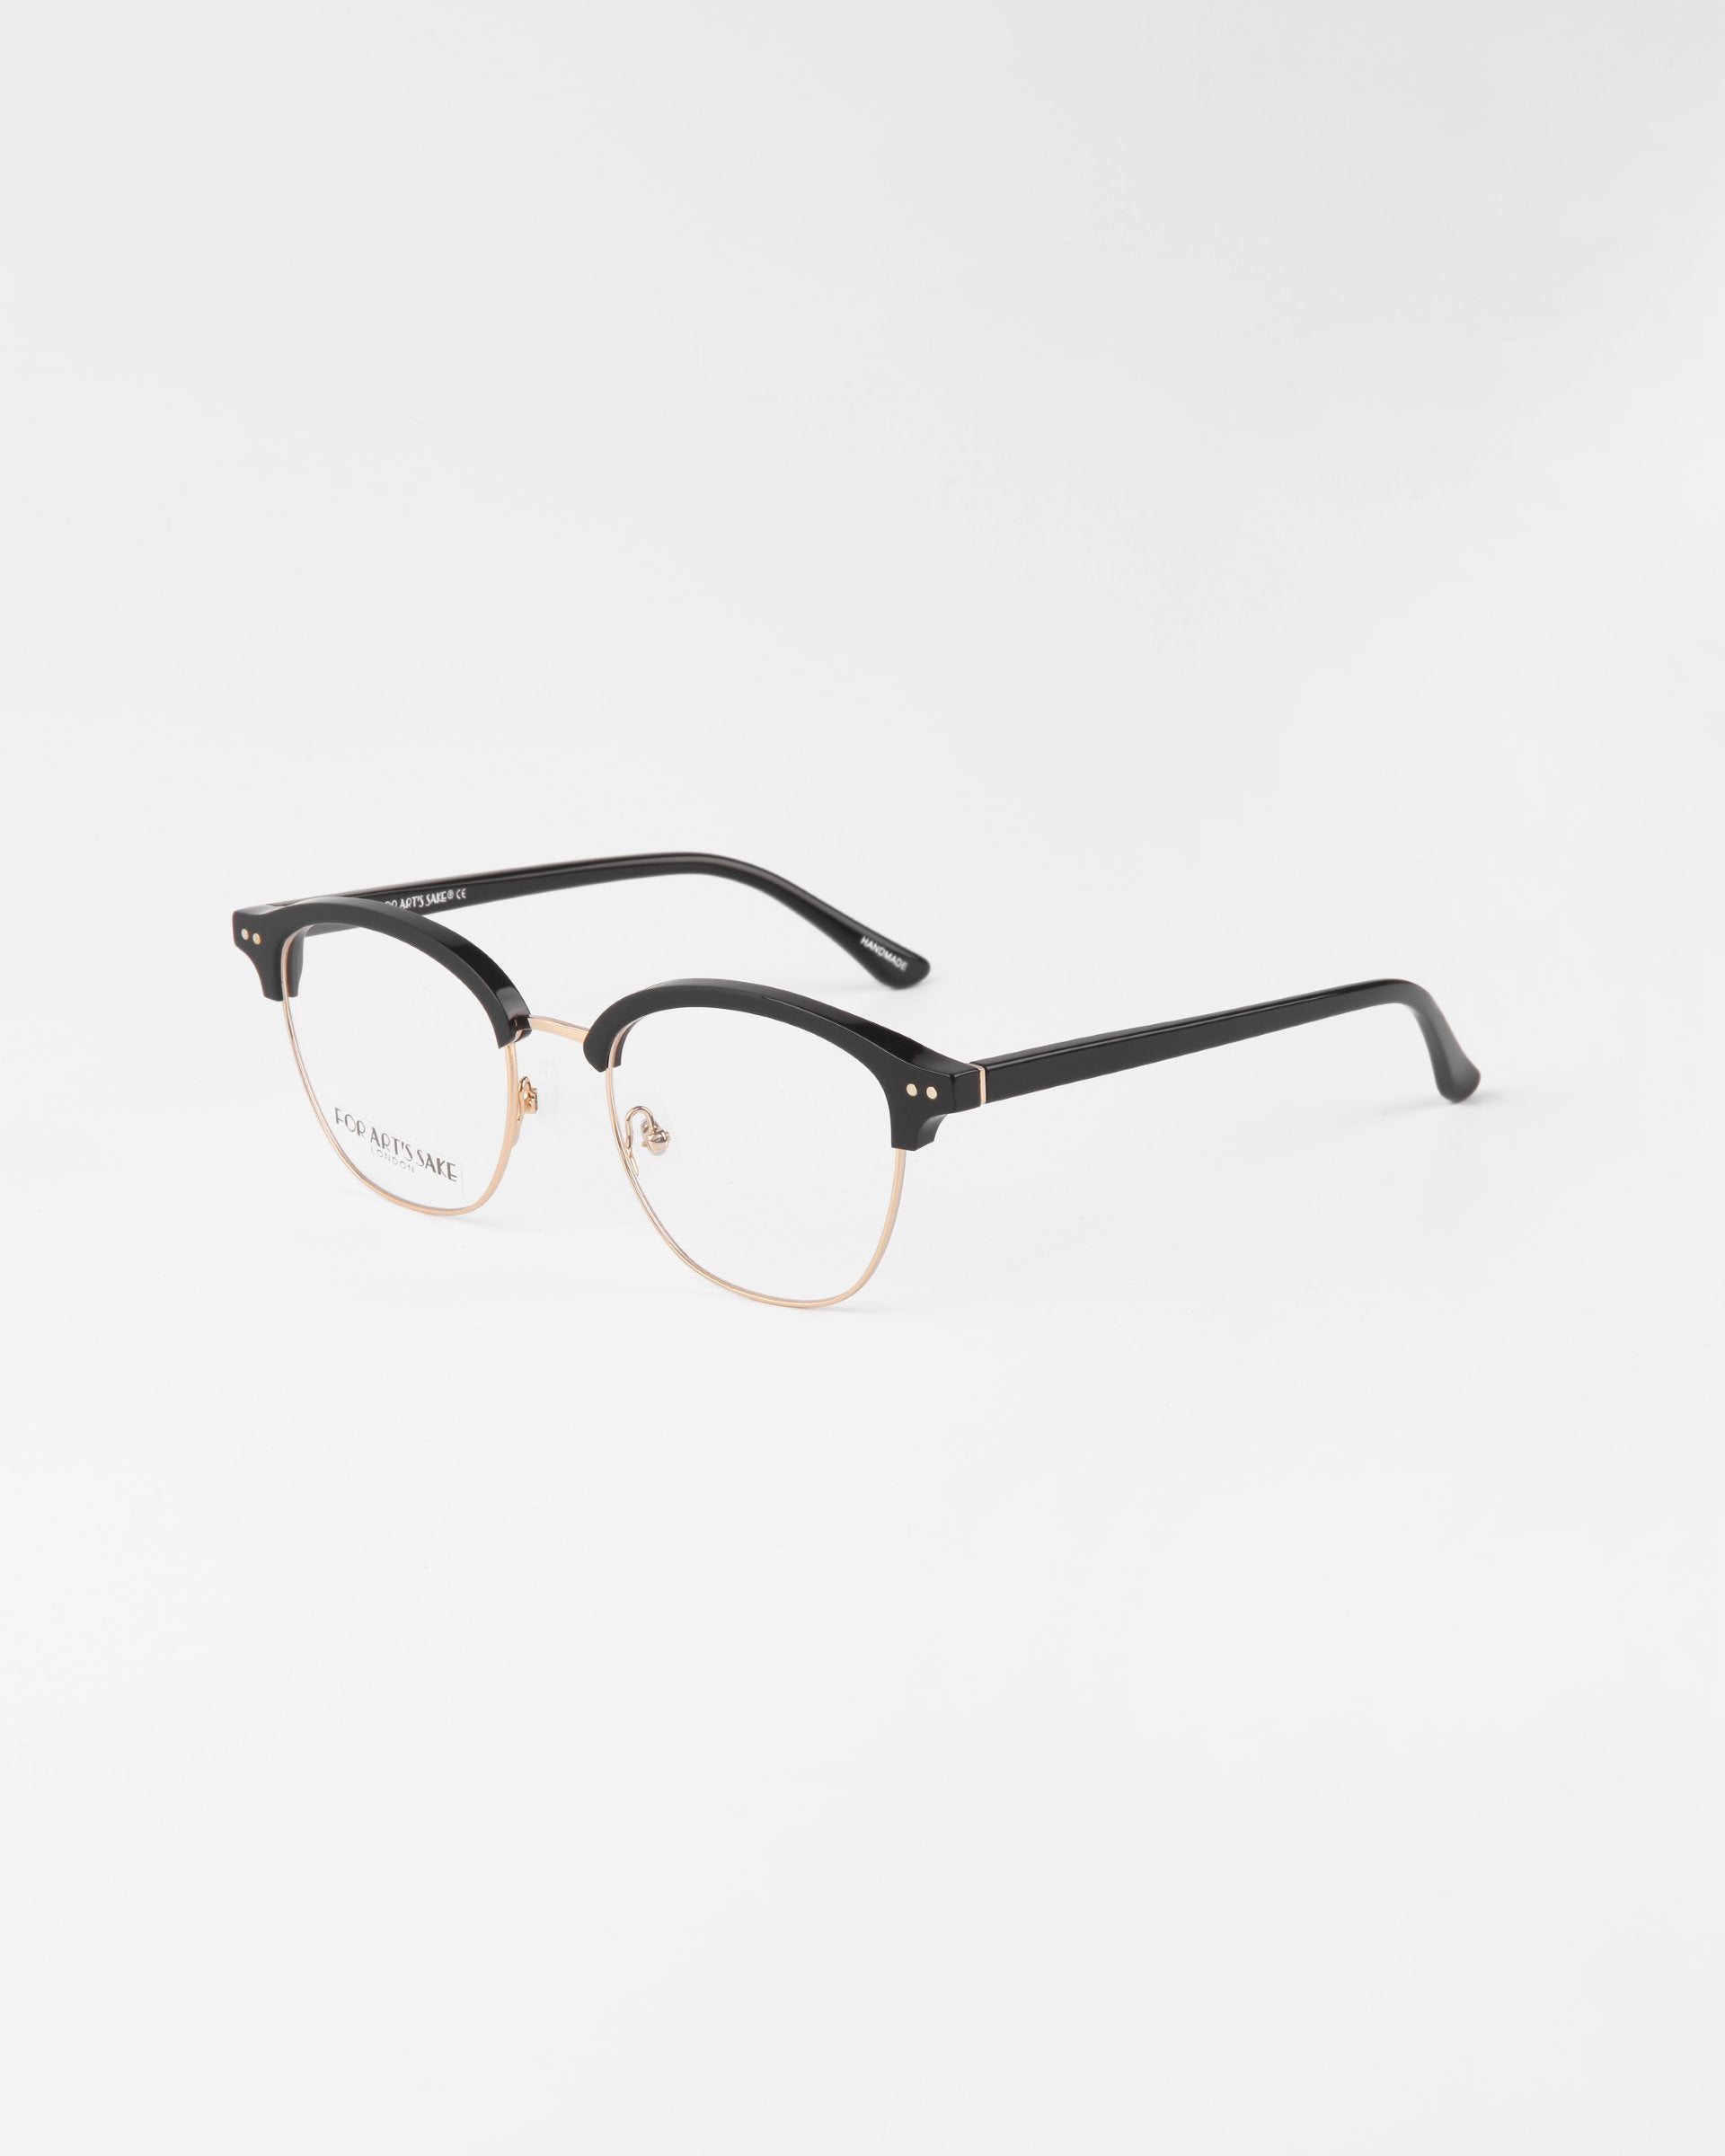 A pair of stylish For Art&#39;s Sake® Painkiller eyeglasses with black upper frames and golden rims, displayed against a white background. The temples are framed in black, and the bridge and nose pads are metallic gold, adding a chic and elegant touch to the overall design. These glasses also come with UV protection.